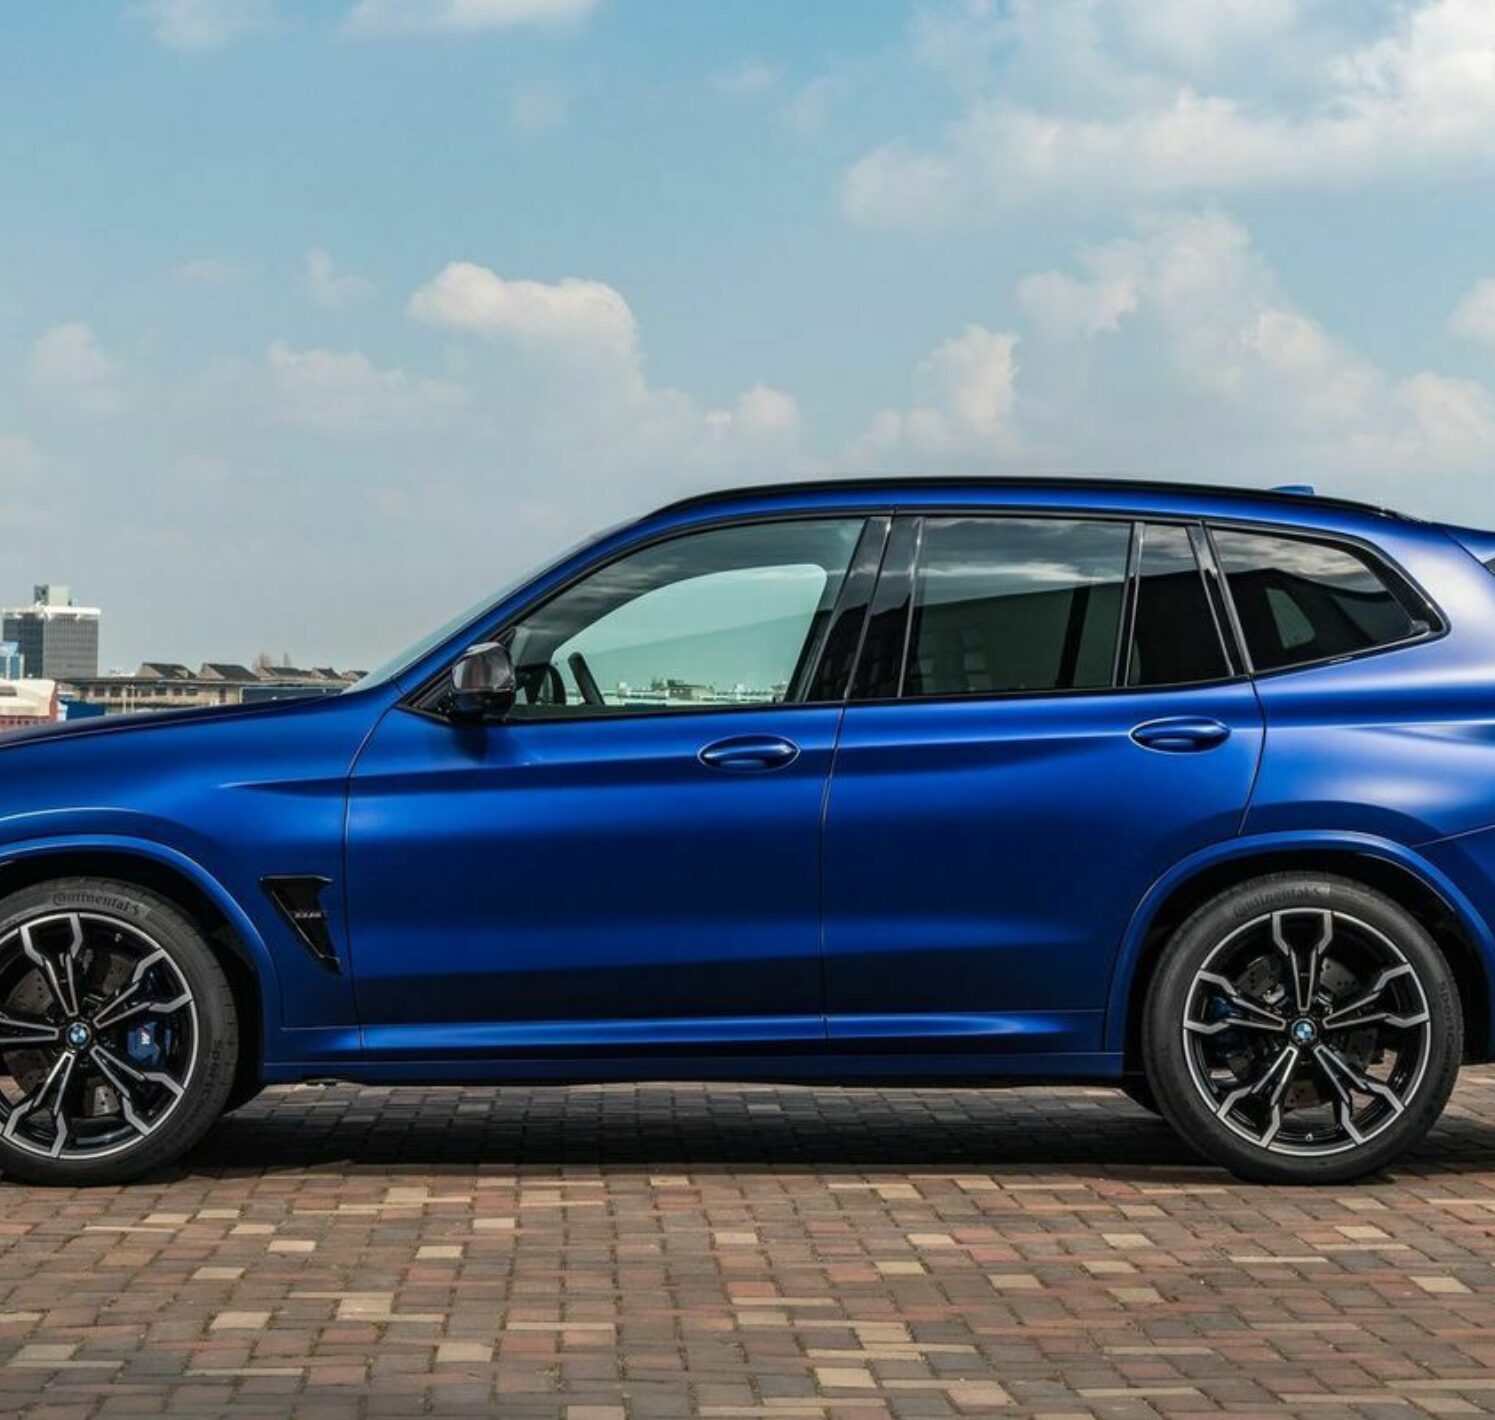 https://autofilter.sk/assets/images/x3/gallery/bmw-x3-m-competition-2022_13-galeria.jpg - obrazok